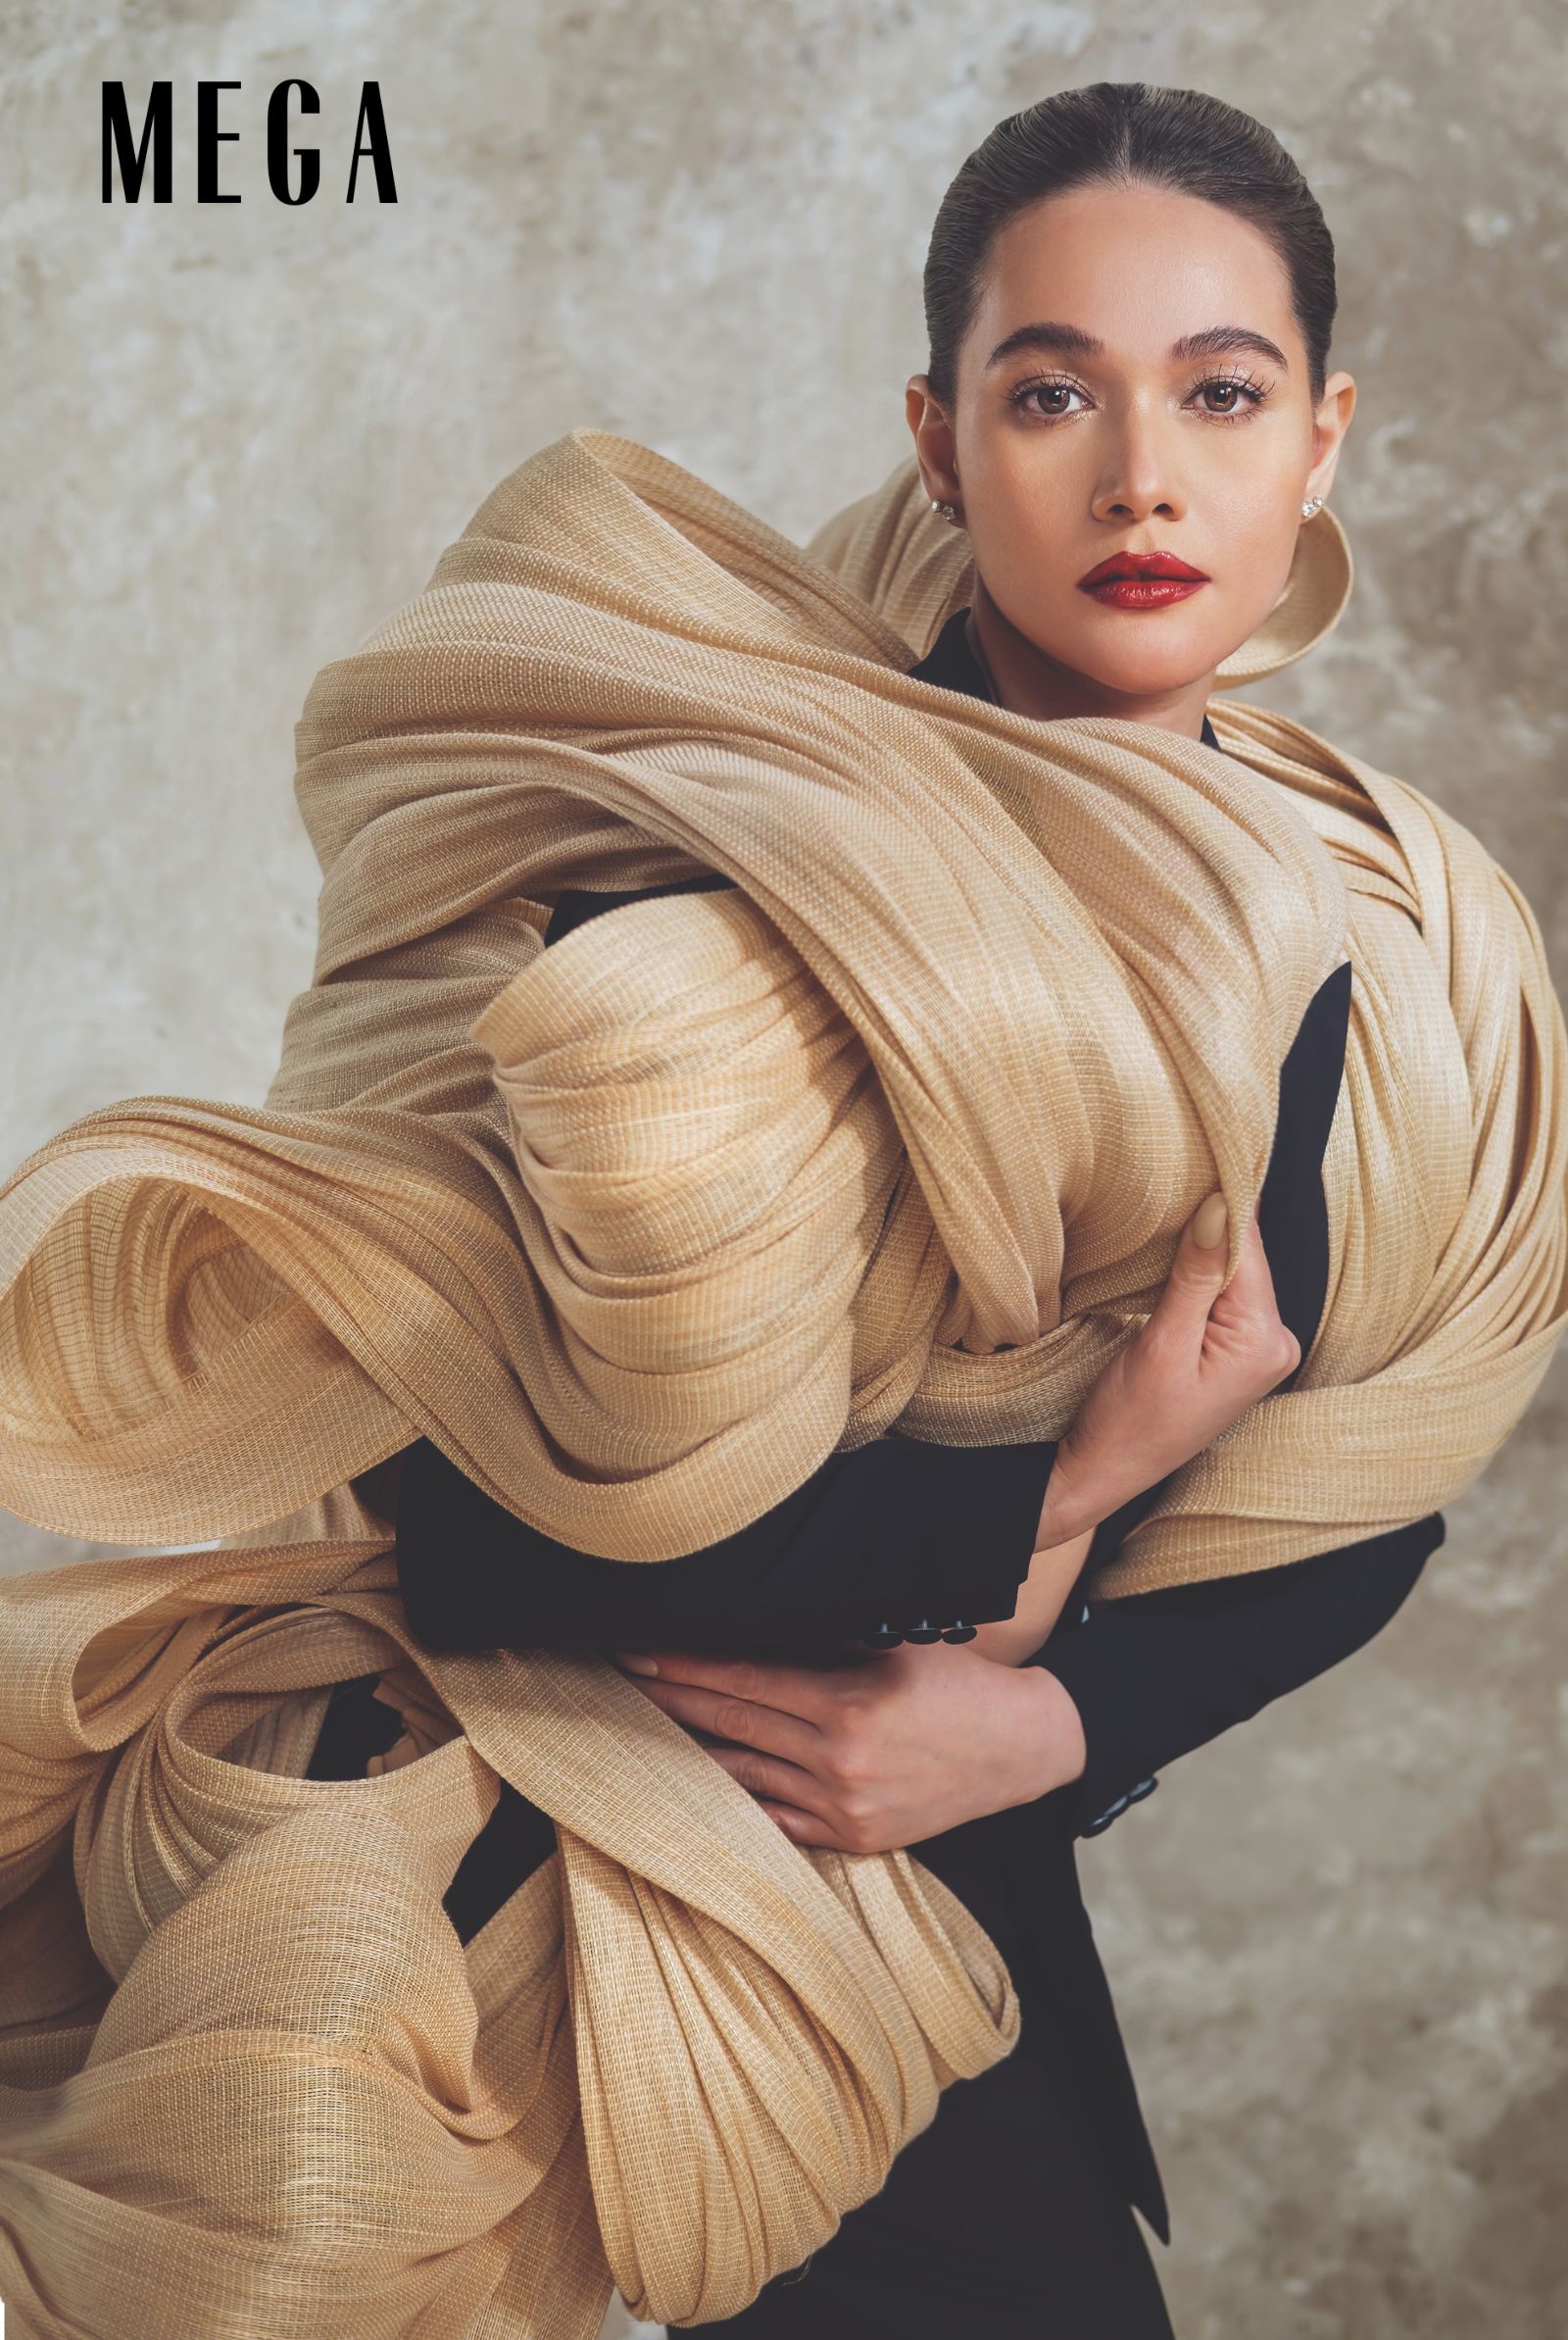 5 Timeless Advice from Rajo Laurel on MEGA: The Next Move